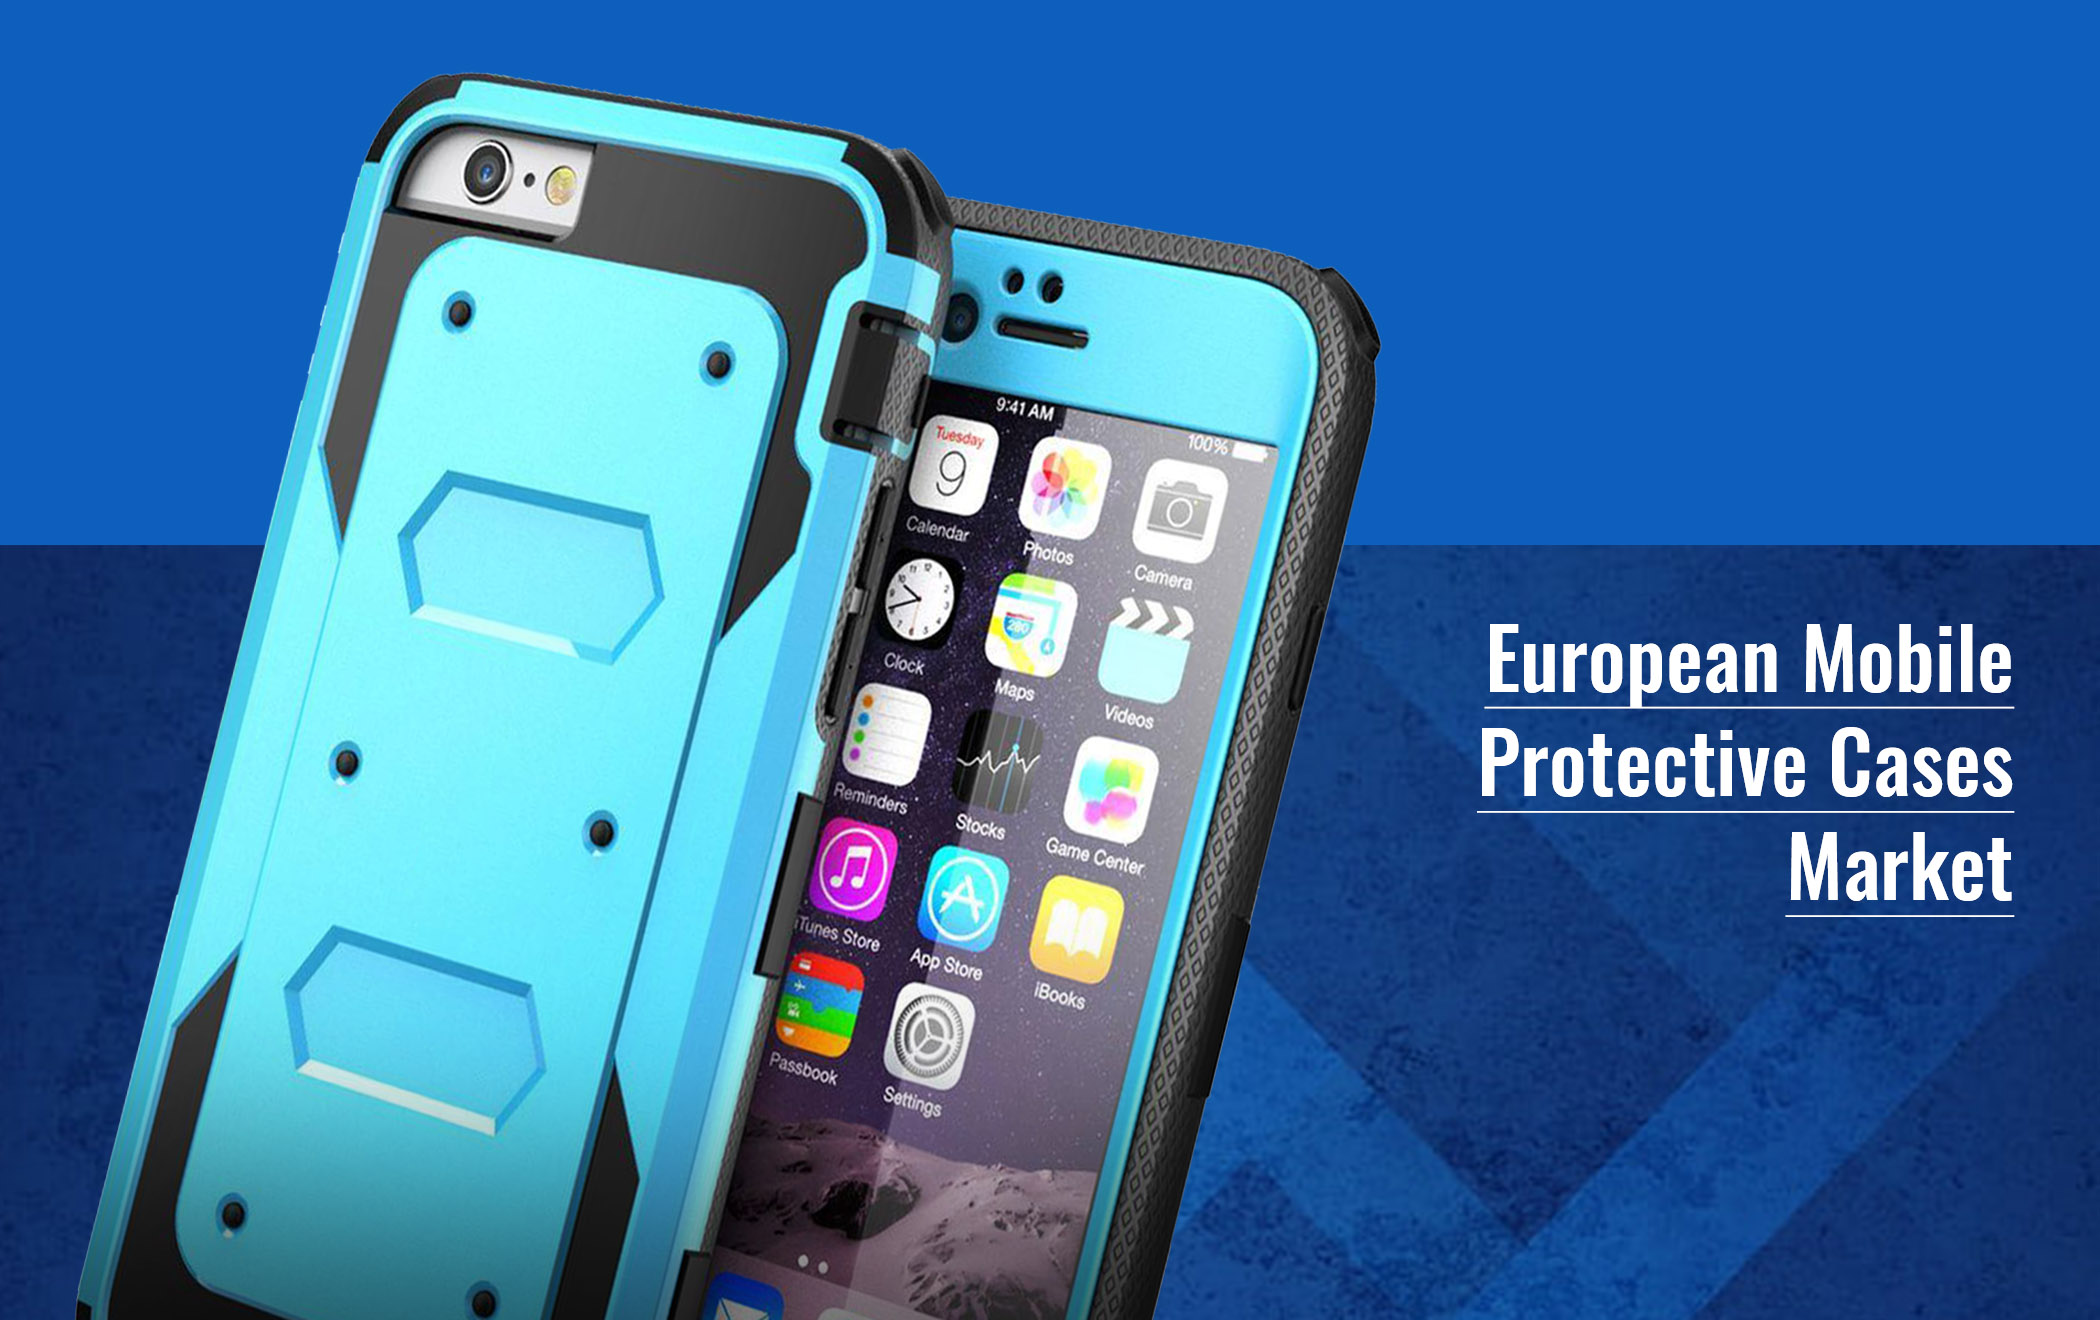 European Mobile Protective Cases Market is Likely to Register a CAGR of 4.3 % Between 2019 to 2030